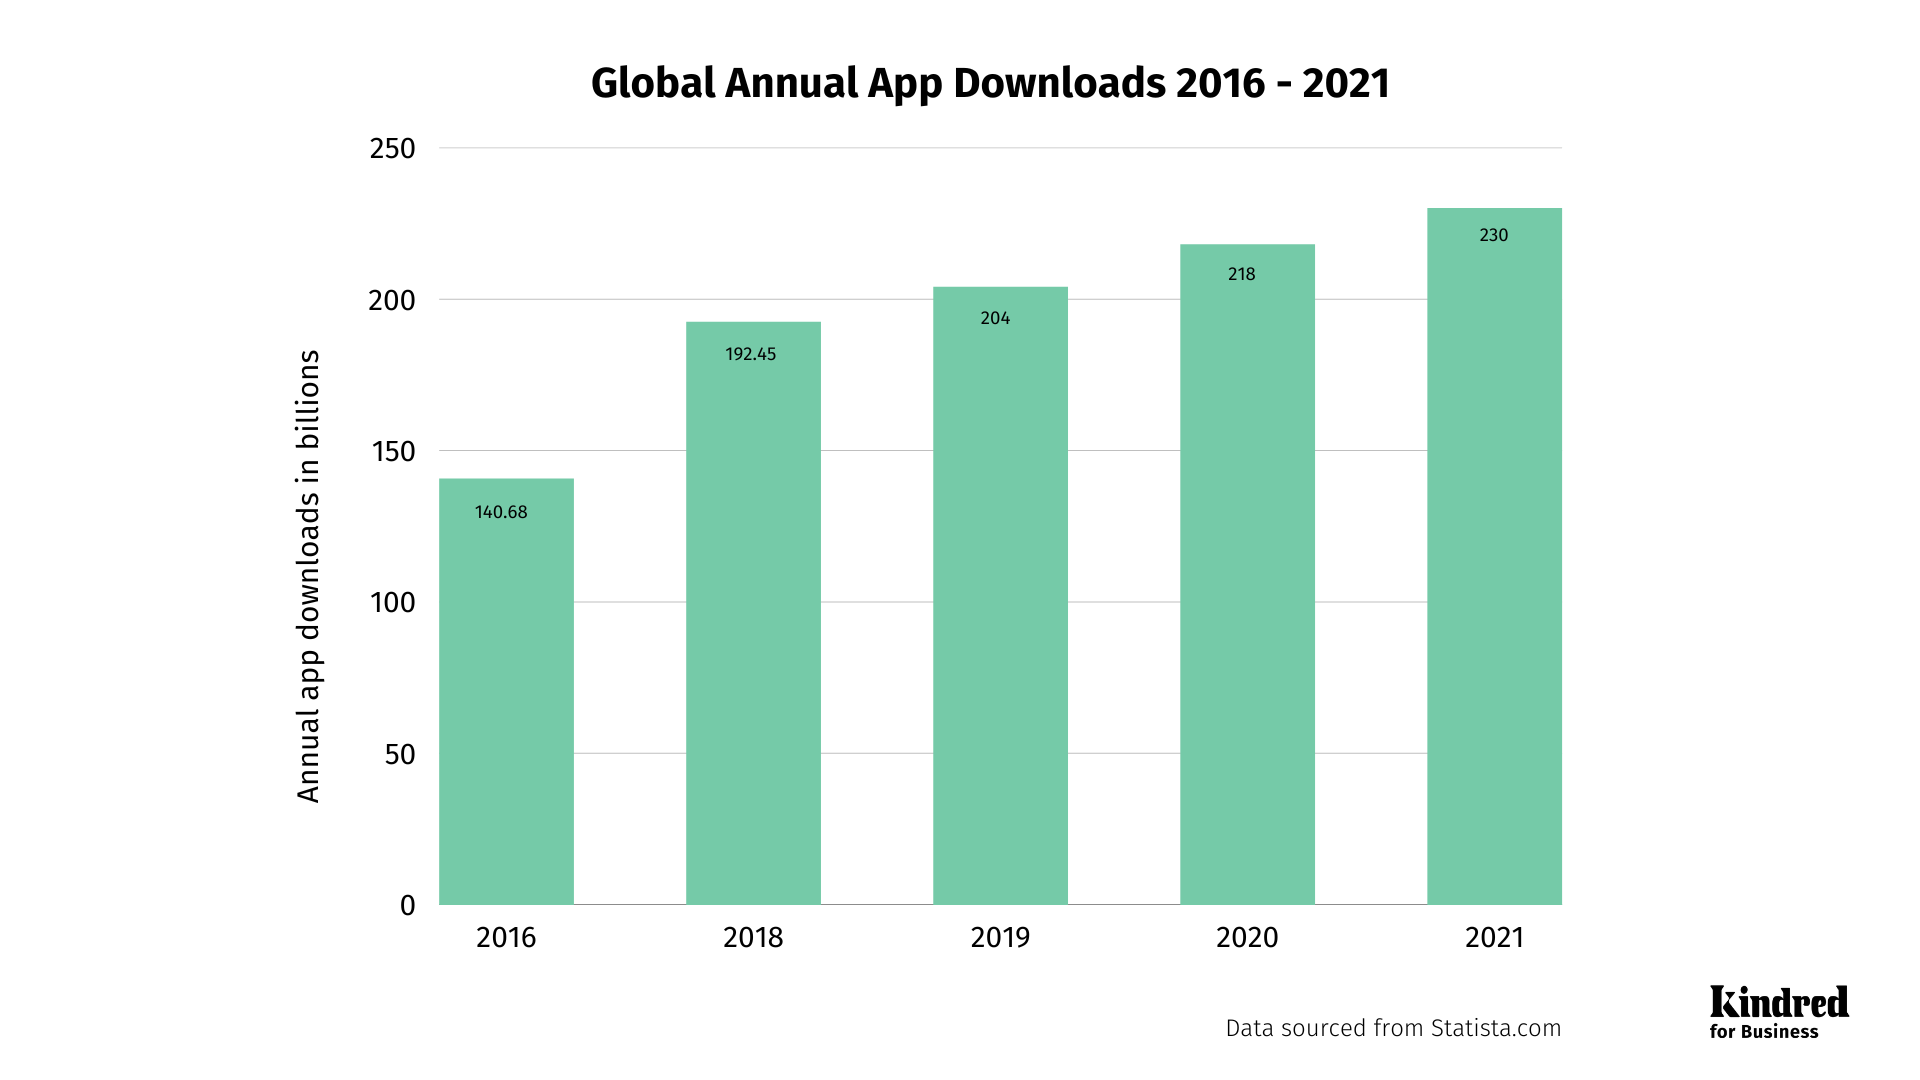 Annual mobile app downloads in billions 2016 to 2021 Kindred for Business x Statista